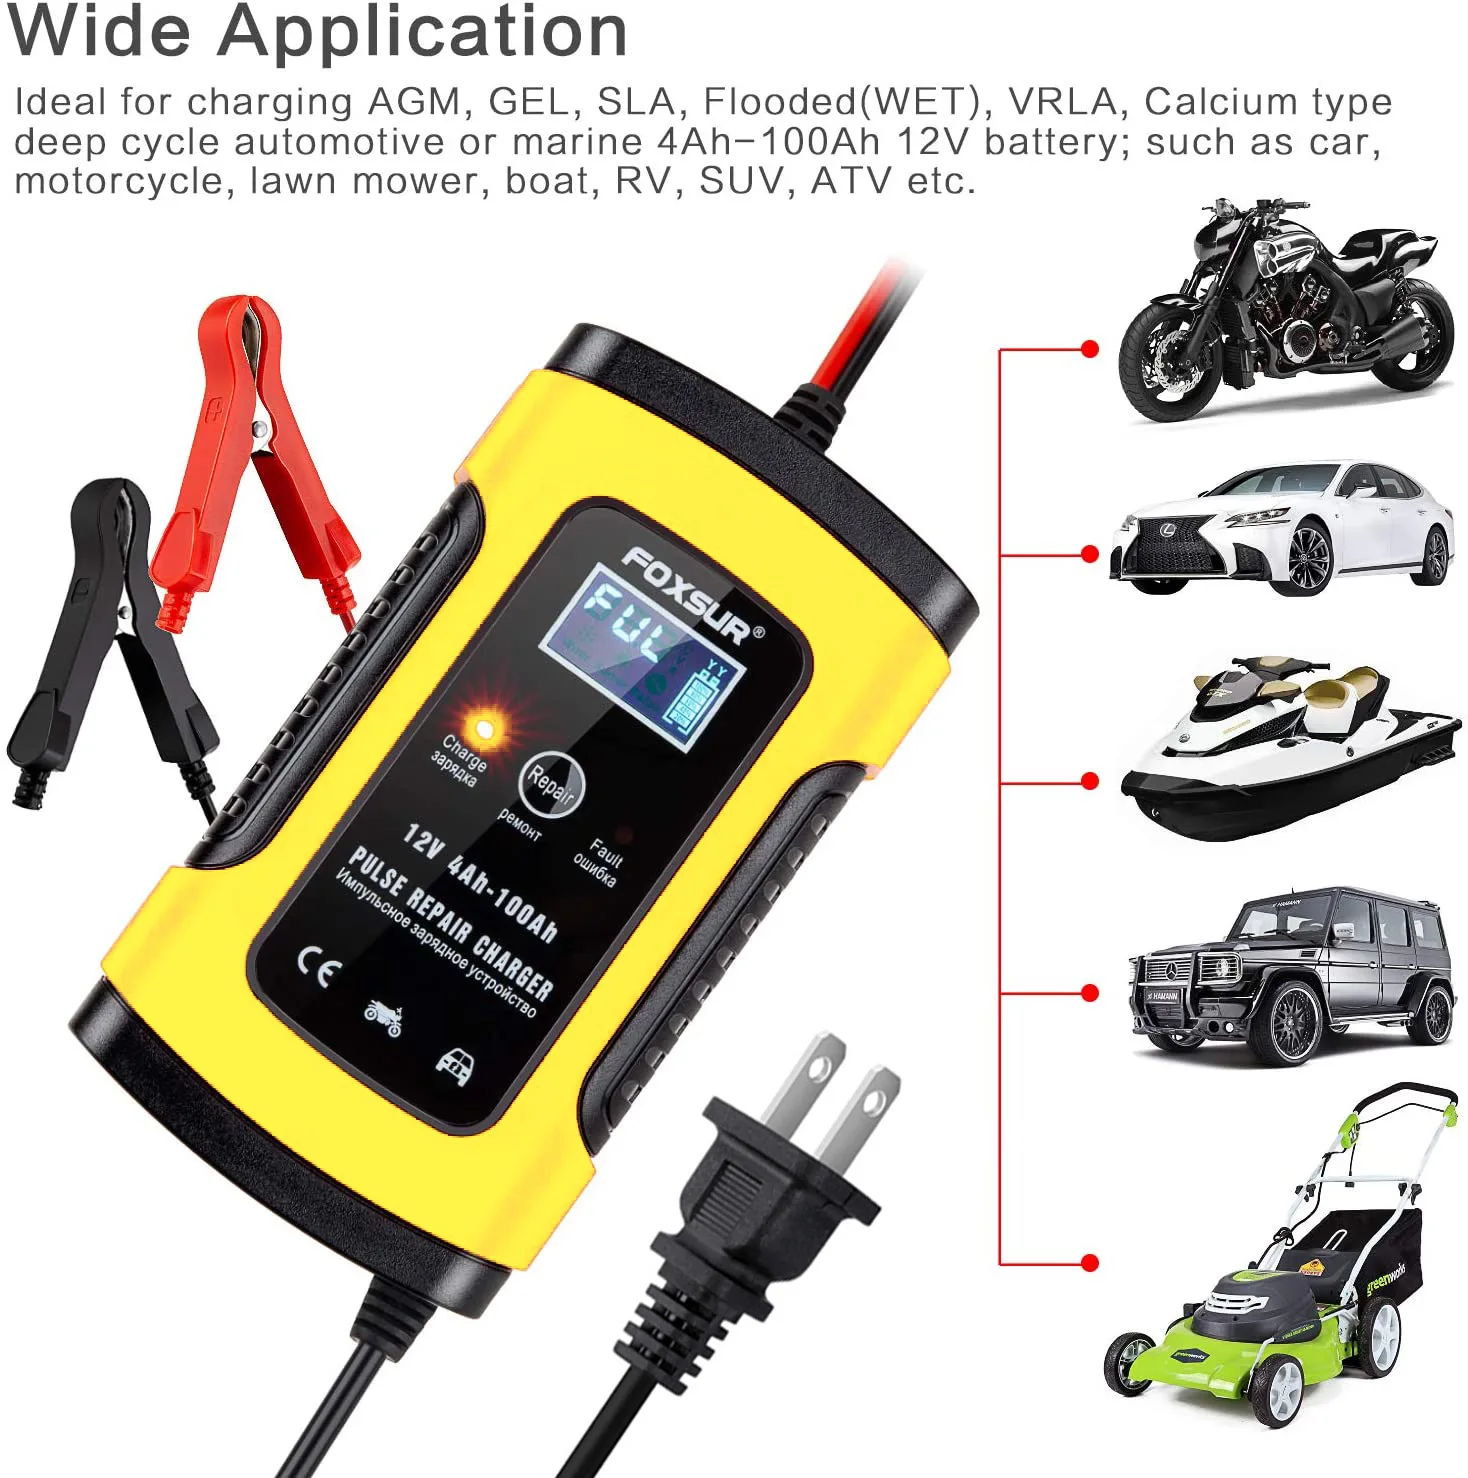 Universal 12V 5A Pulse Repair Smart Charger for Motorcycle Car Battery Charger, 12V AGM GEL WET Lead Acid Battery Charger